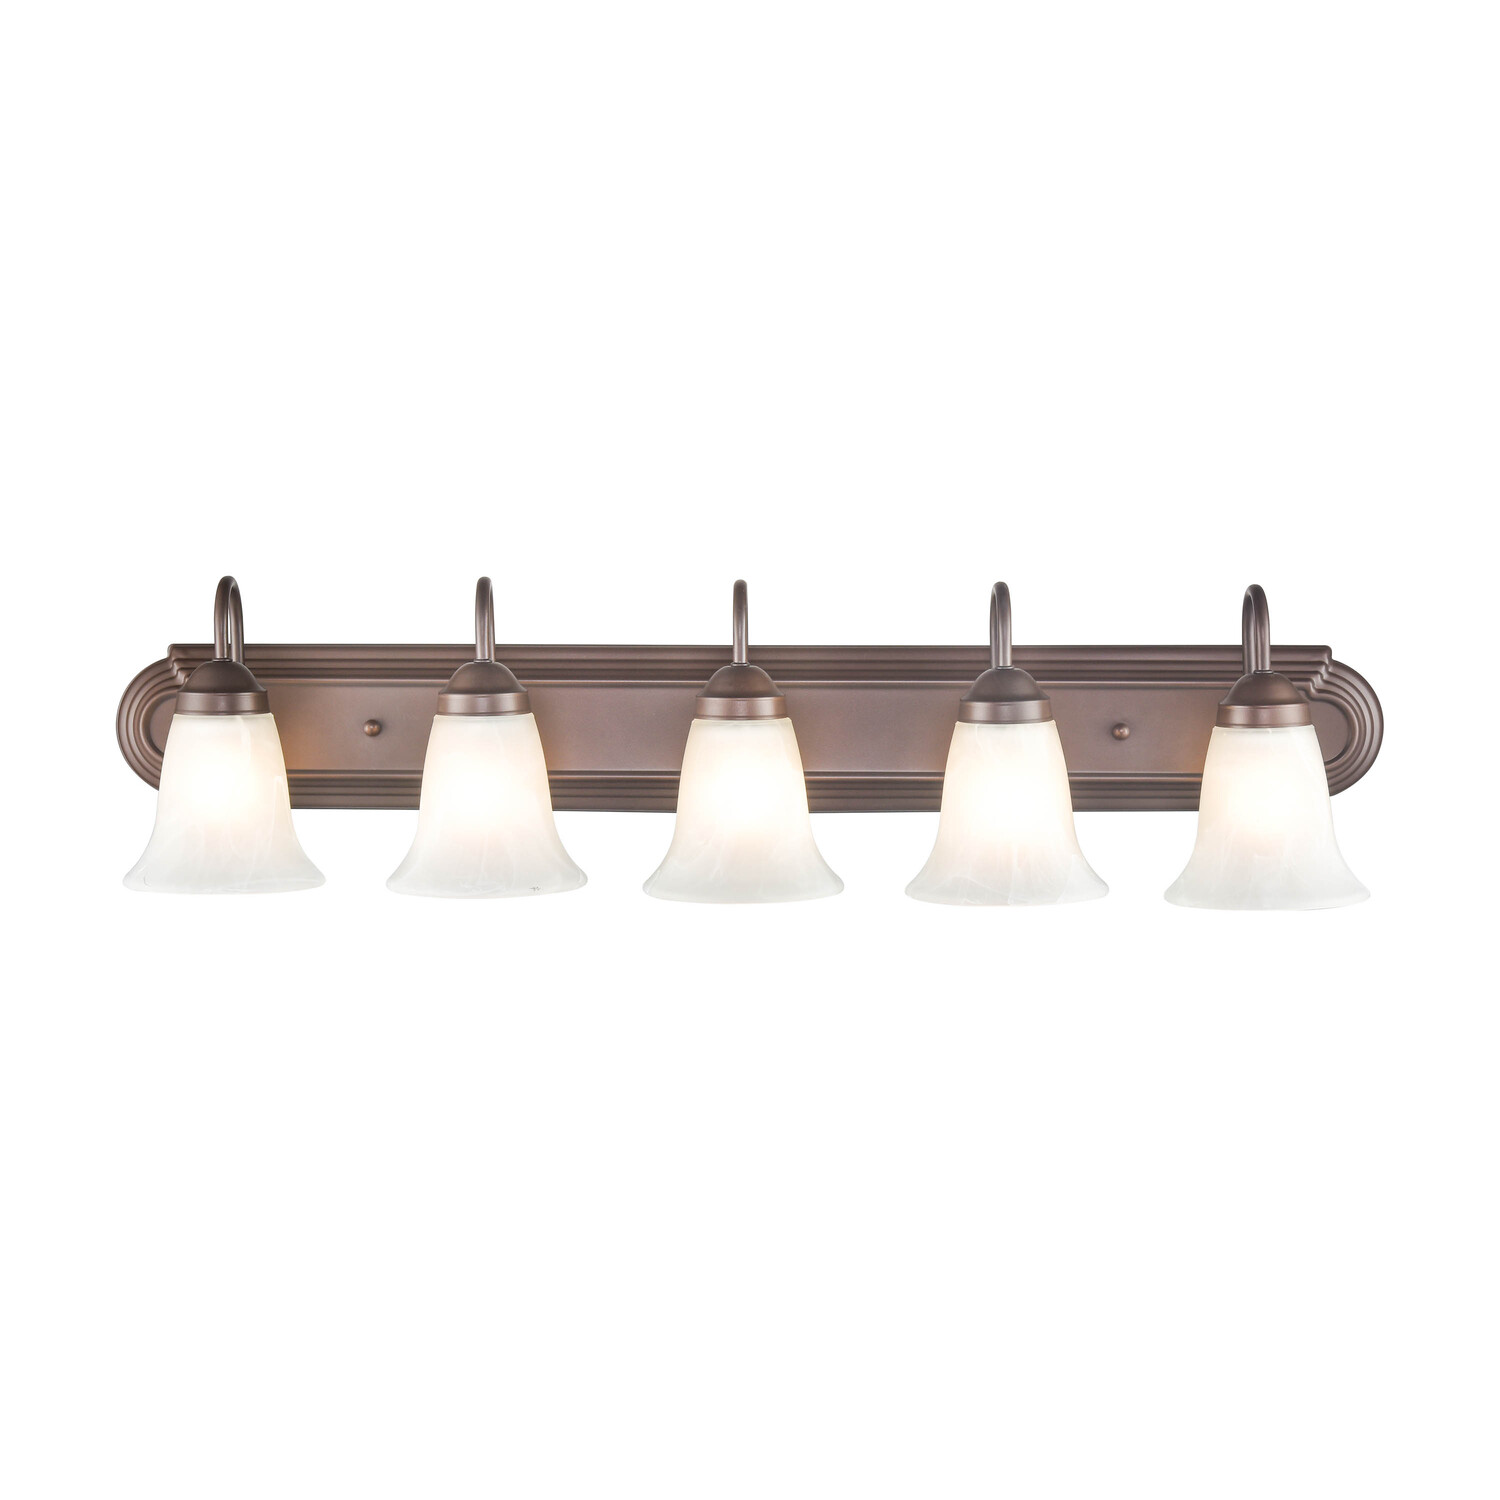 4285-BZ-Millennium Lighting-5 Light Bath Vanity-8.5 Inches Tall and 36 Inches Wide-Bronze Finish - image 3 of 6